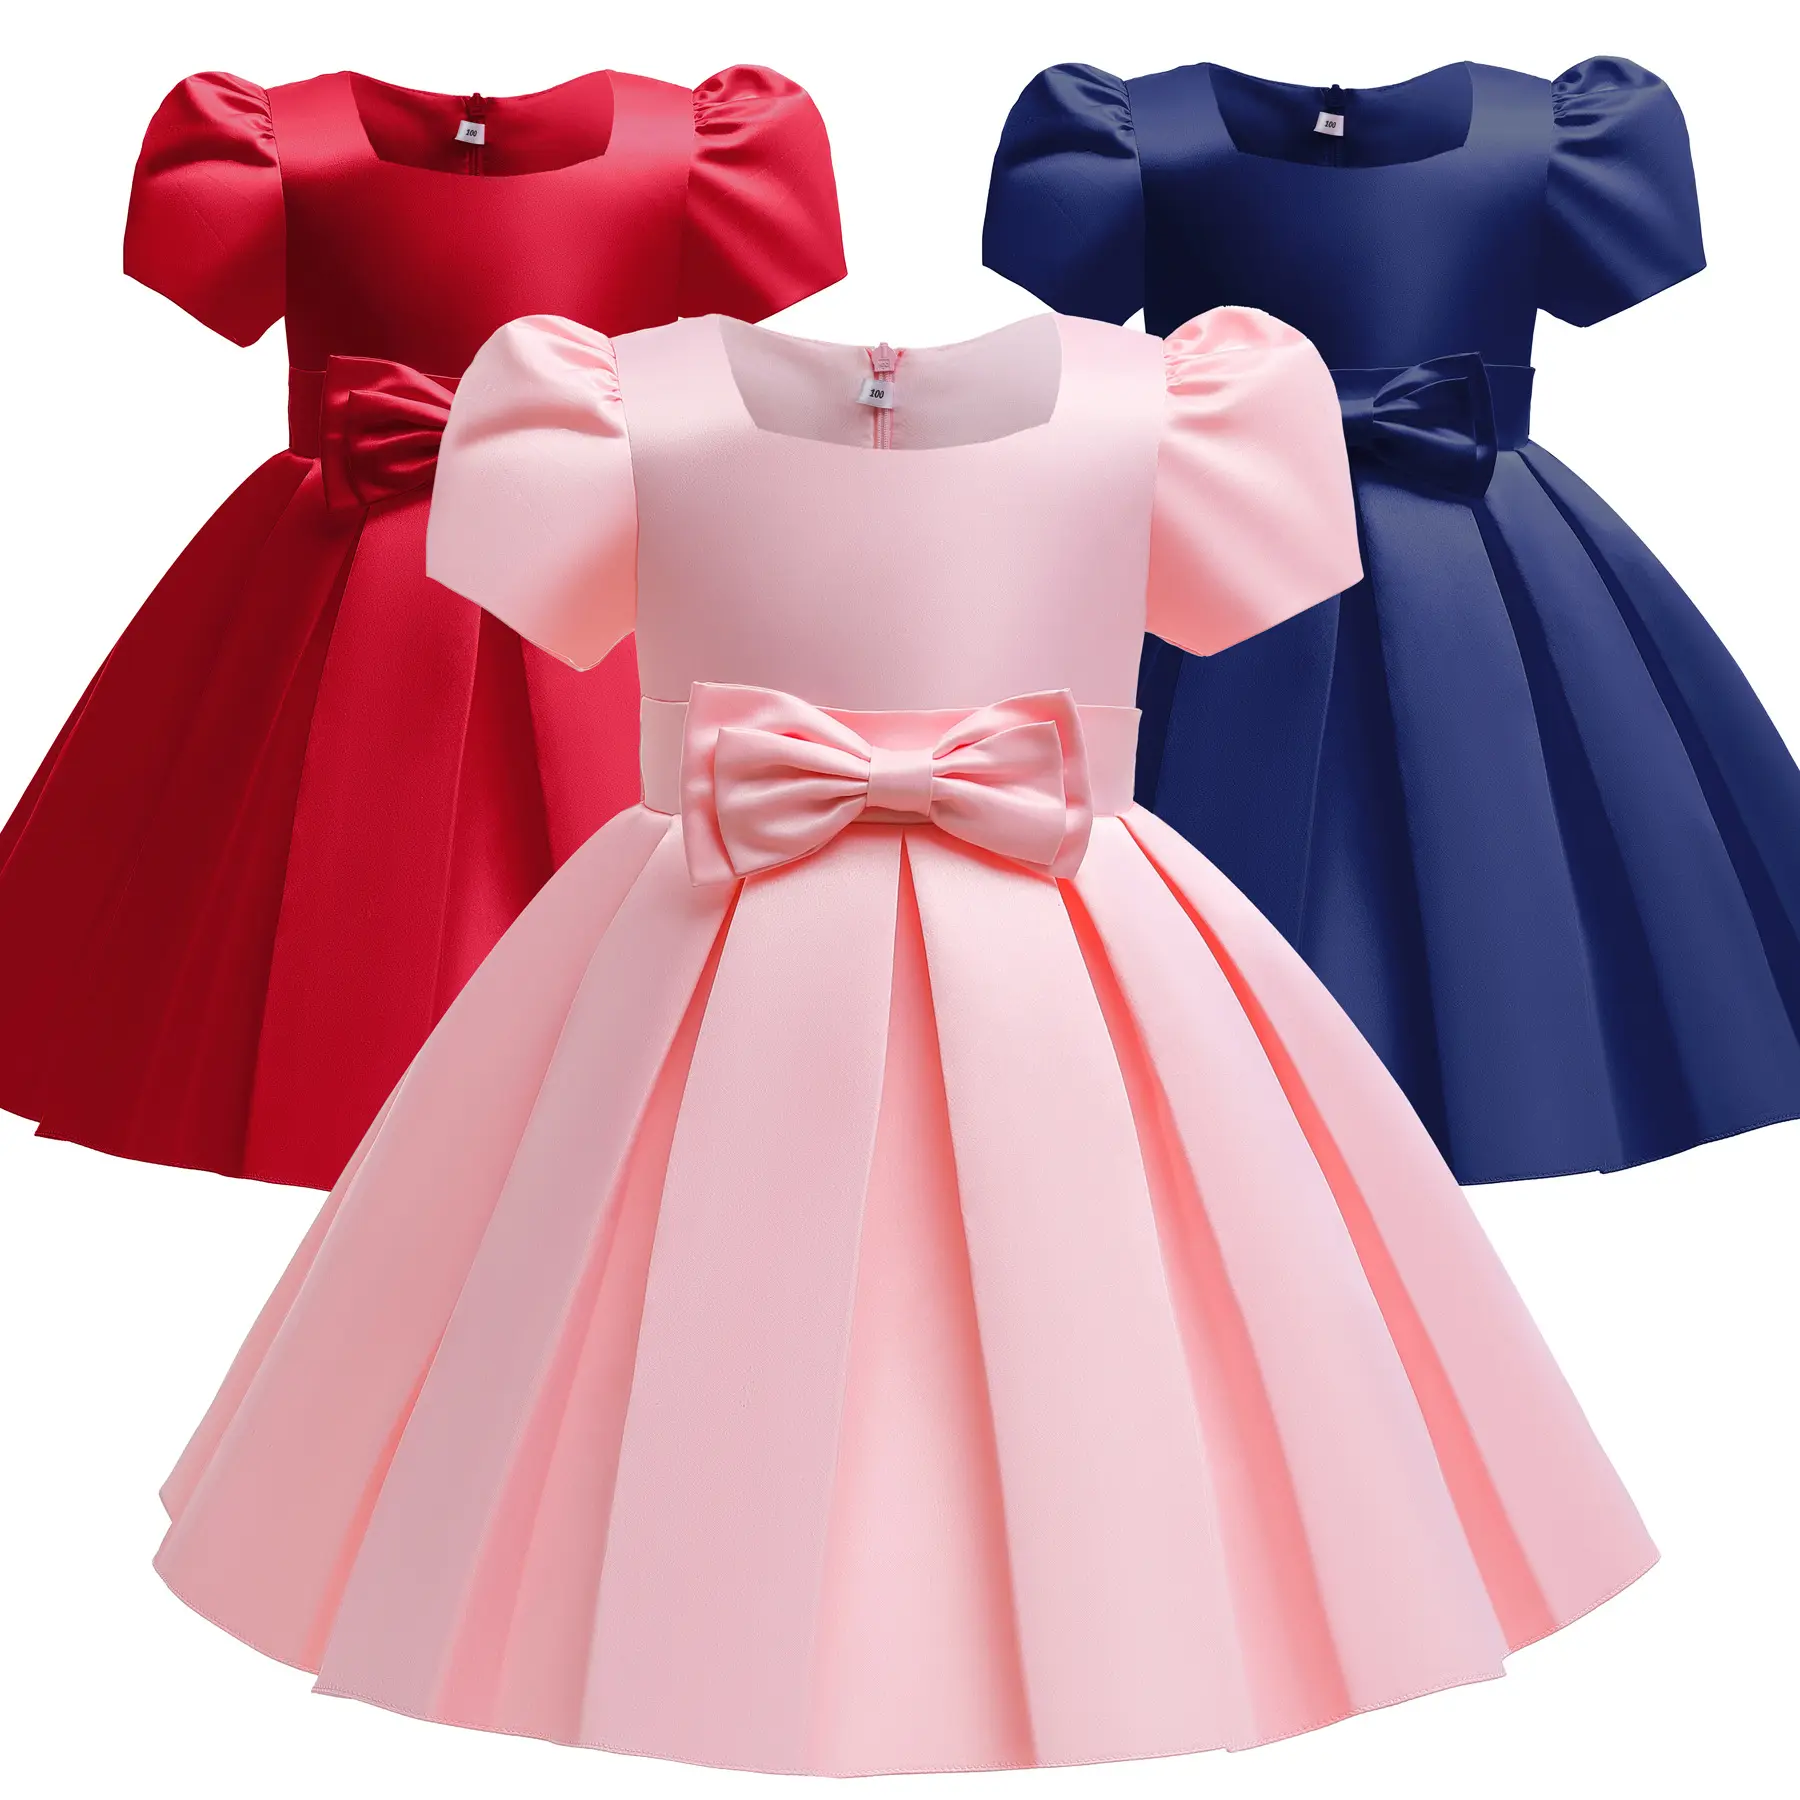 2346 baby girl party smocked dresses princess princess dresses for girls 5 to 10 years